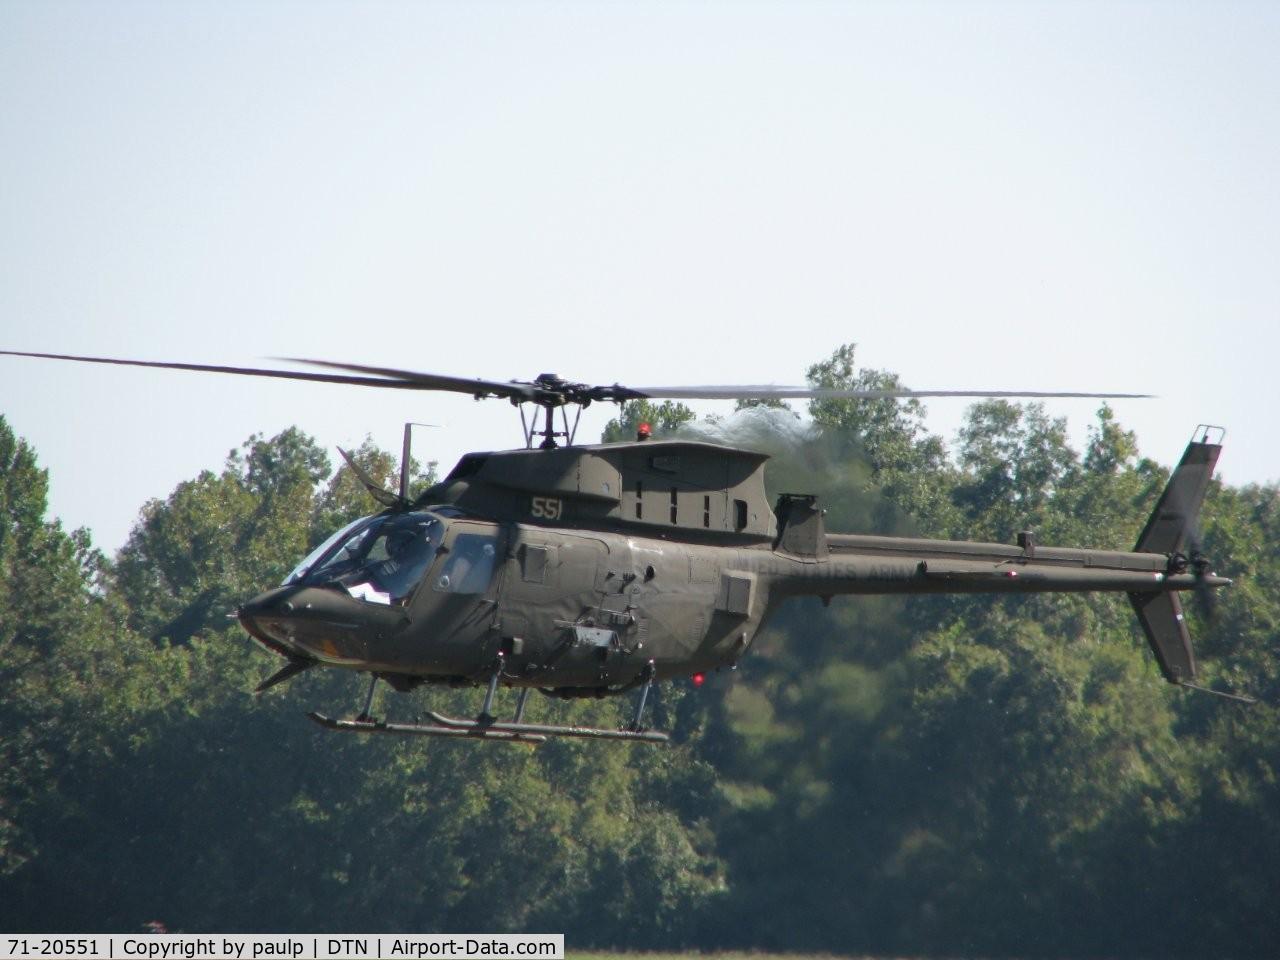 71-20551, 1971 Bell OH-58A Kiowa C/N 41412, Landing at the Downtown Shreveport airport.